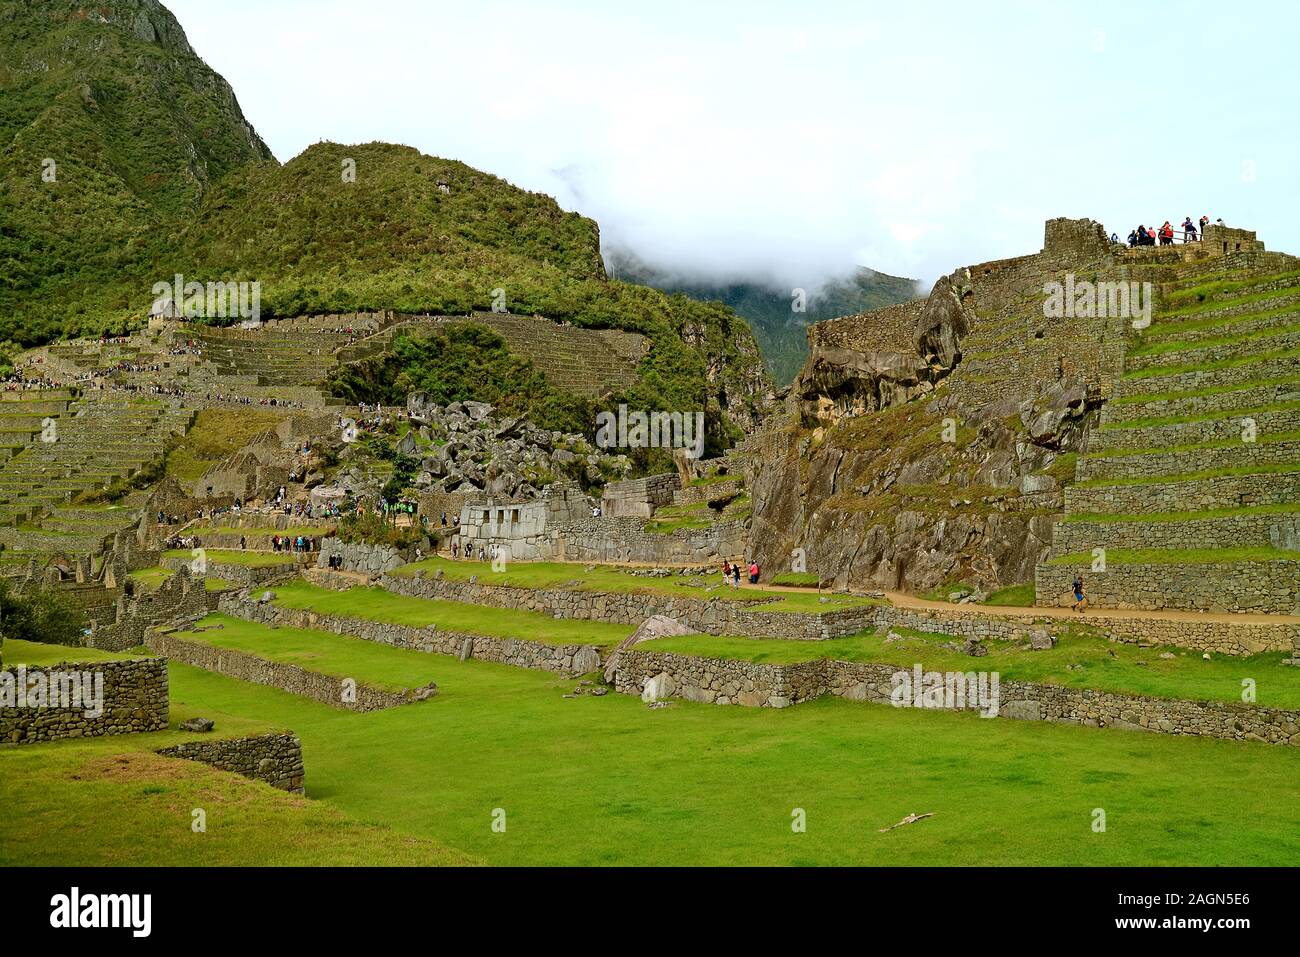 Incredible Ancient Inca Structures Inside Machu Picchu, the New Seven Wonders of the World in Cusco Region of Peru Stock Photo